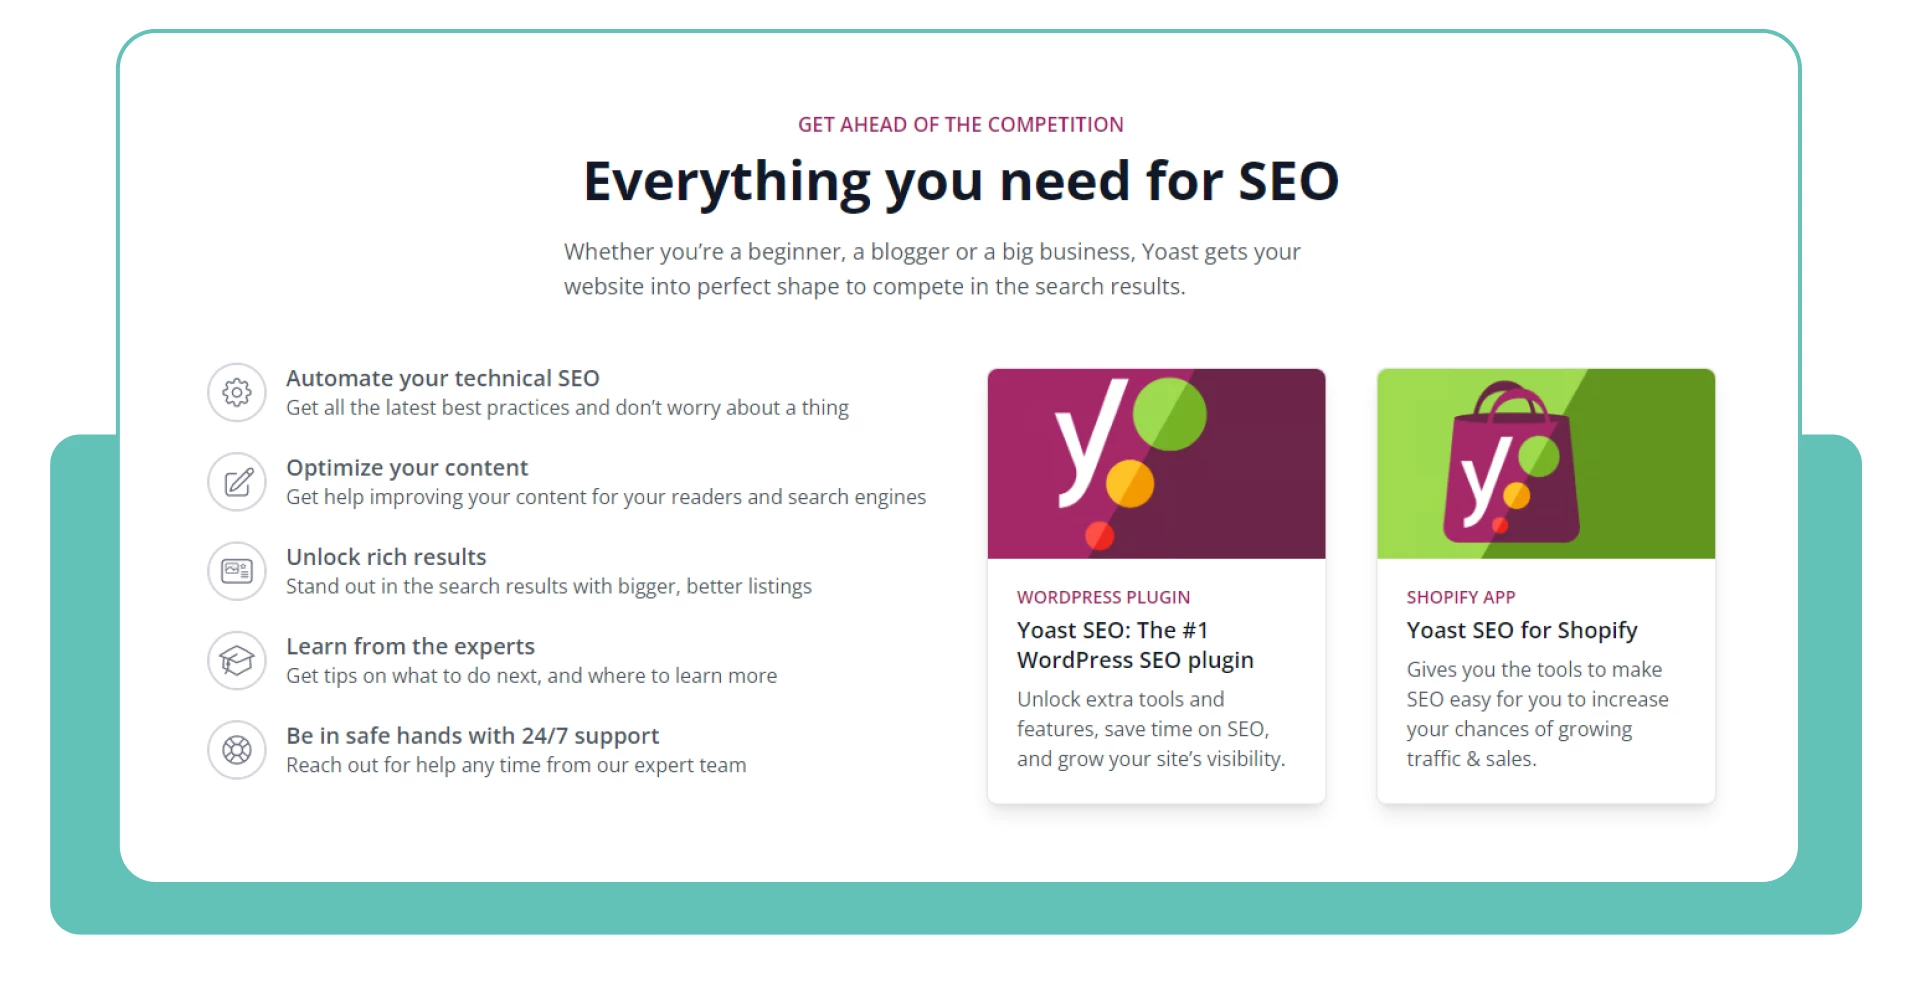 Yoast’s mission is SEO for Everyone